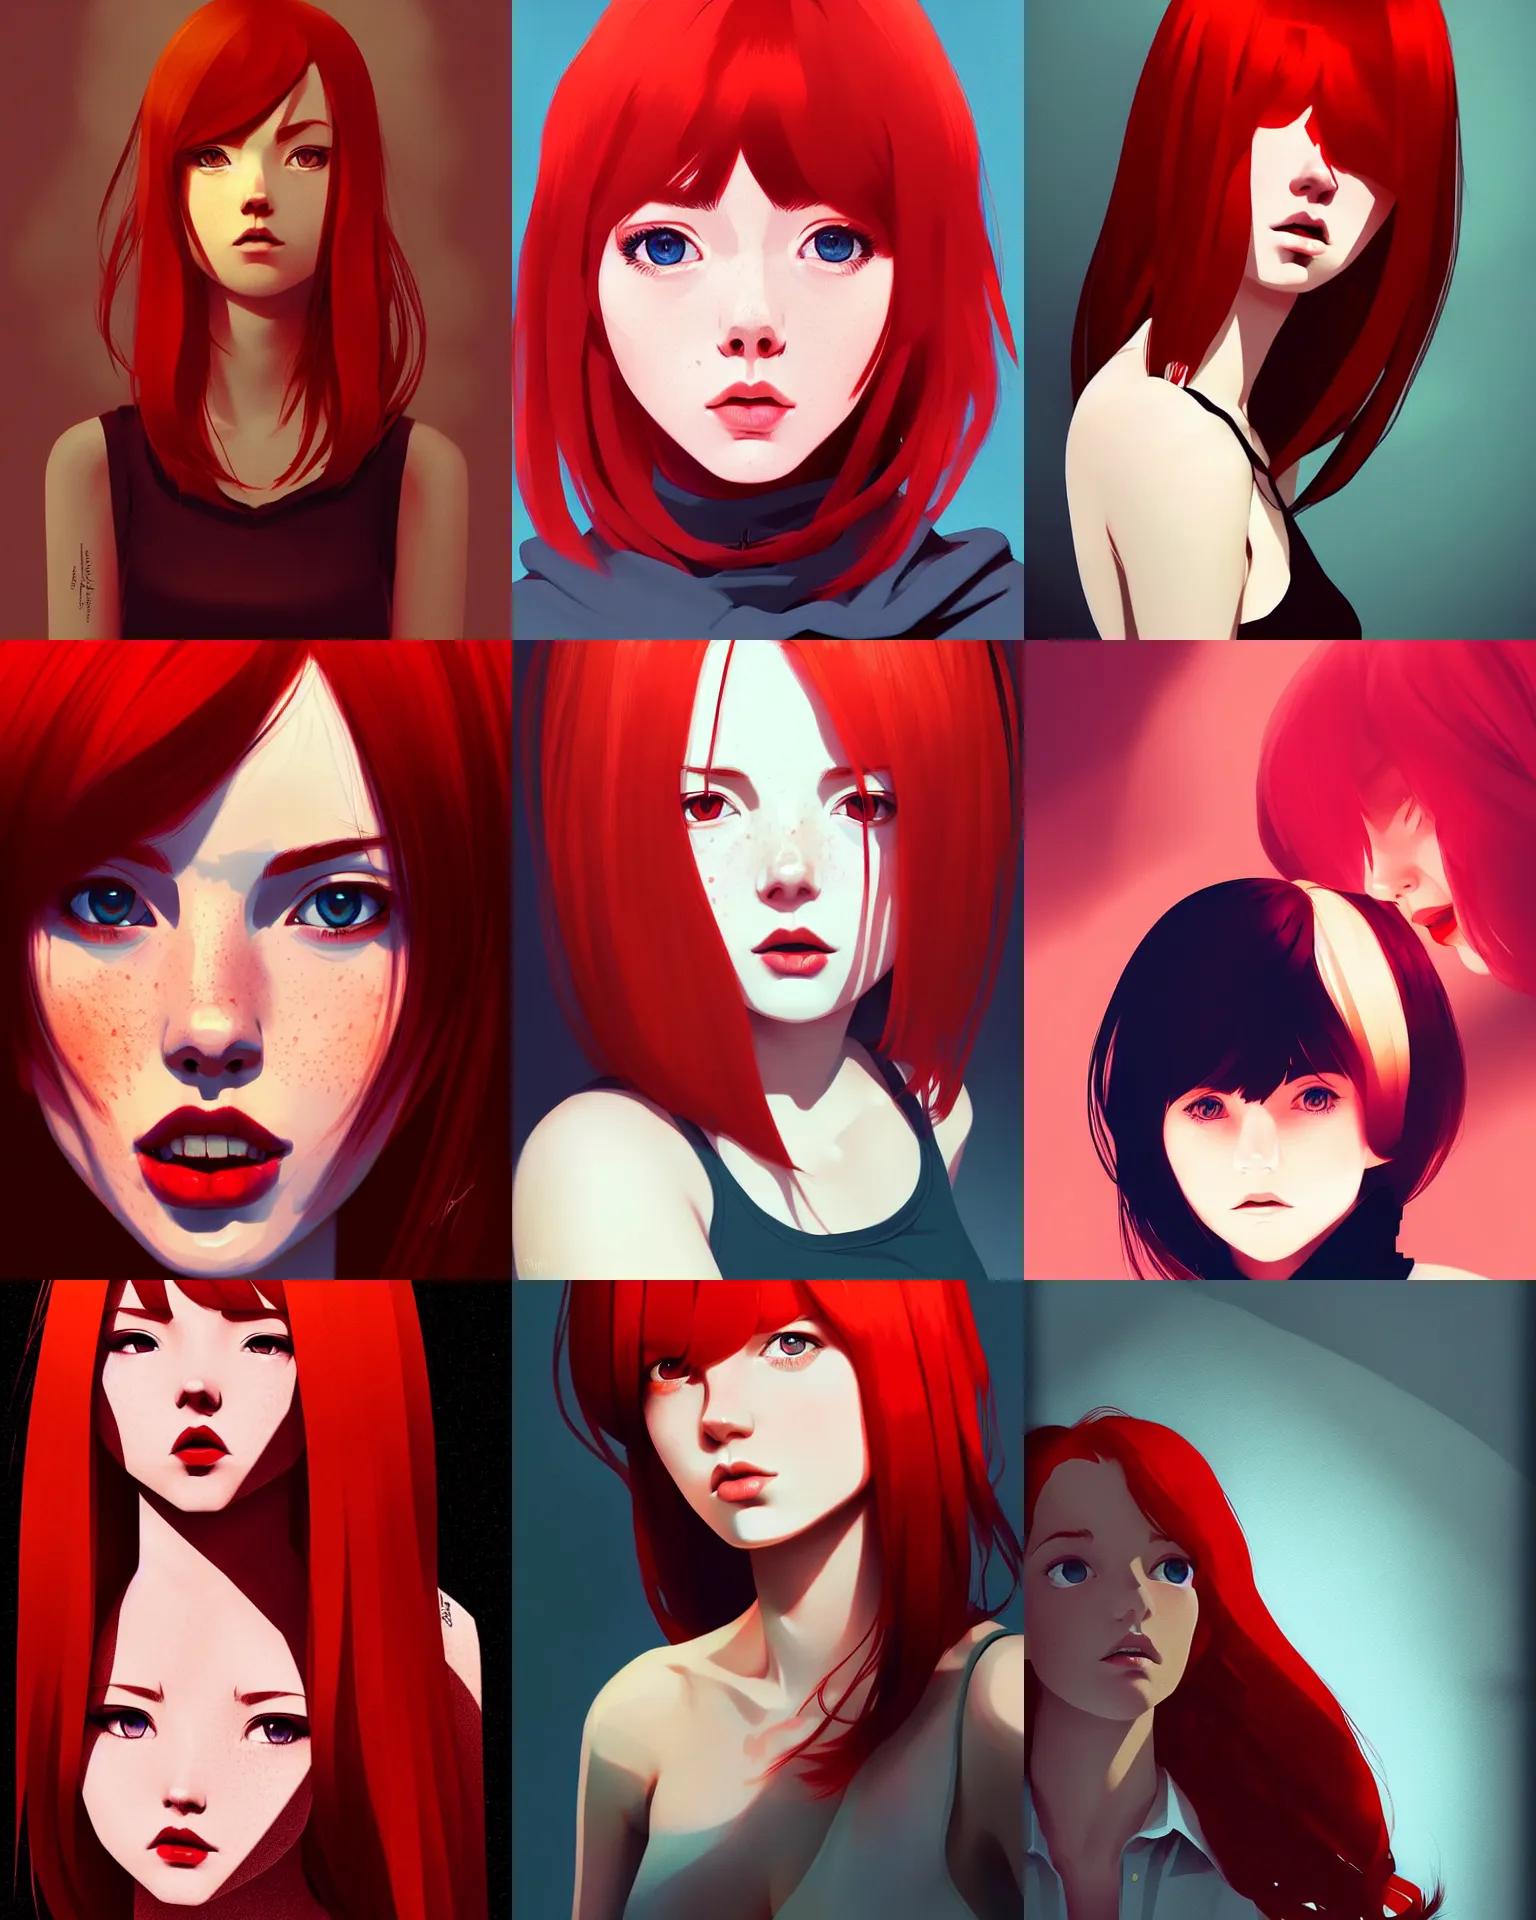 Prompt: an adorable!!!! woman with red hair and freckles by ilya kuvshinov, digital art, dramatic lighting, dramatic angle